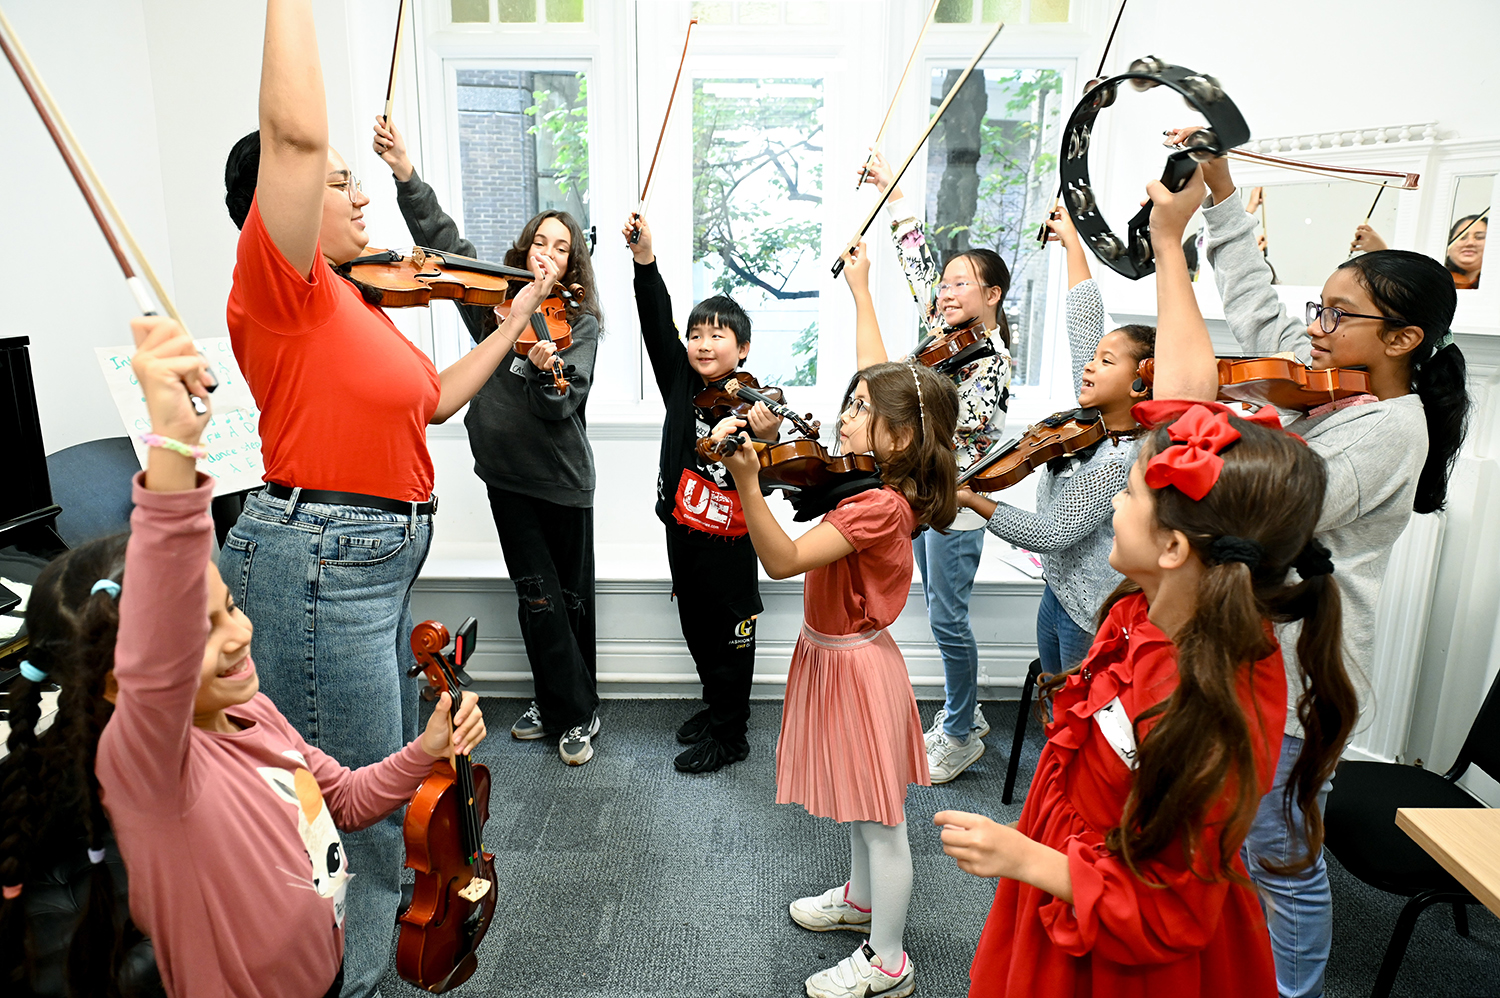 Children holding bows of a violin and tambourines in the air with an RCM Sparks member